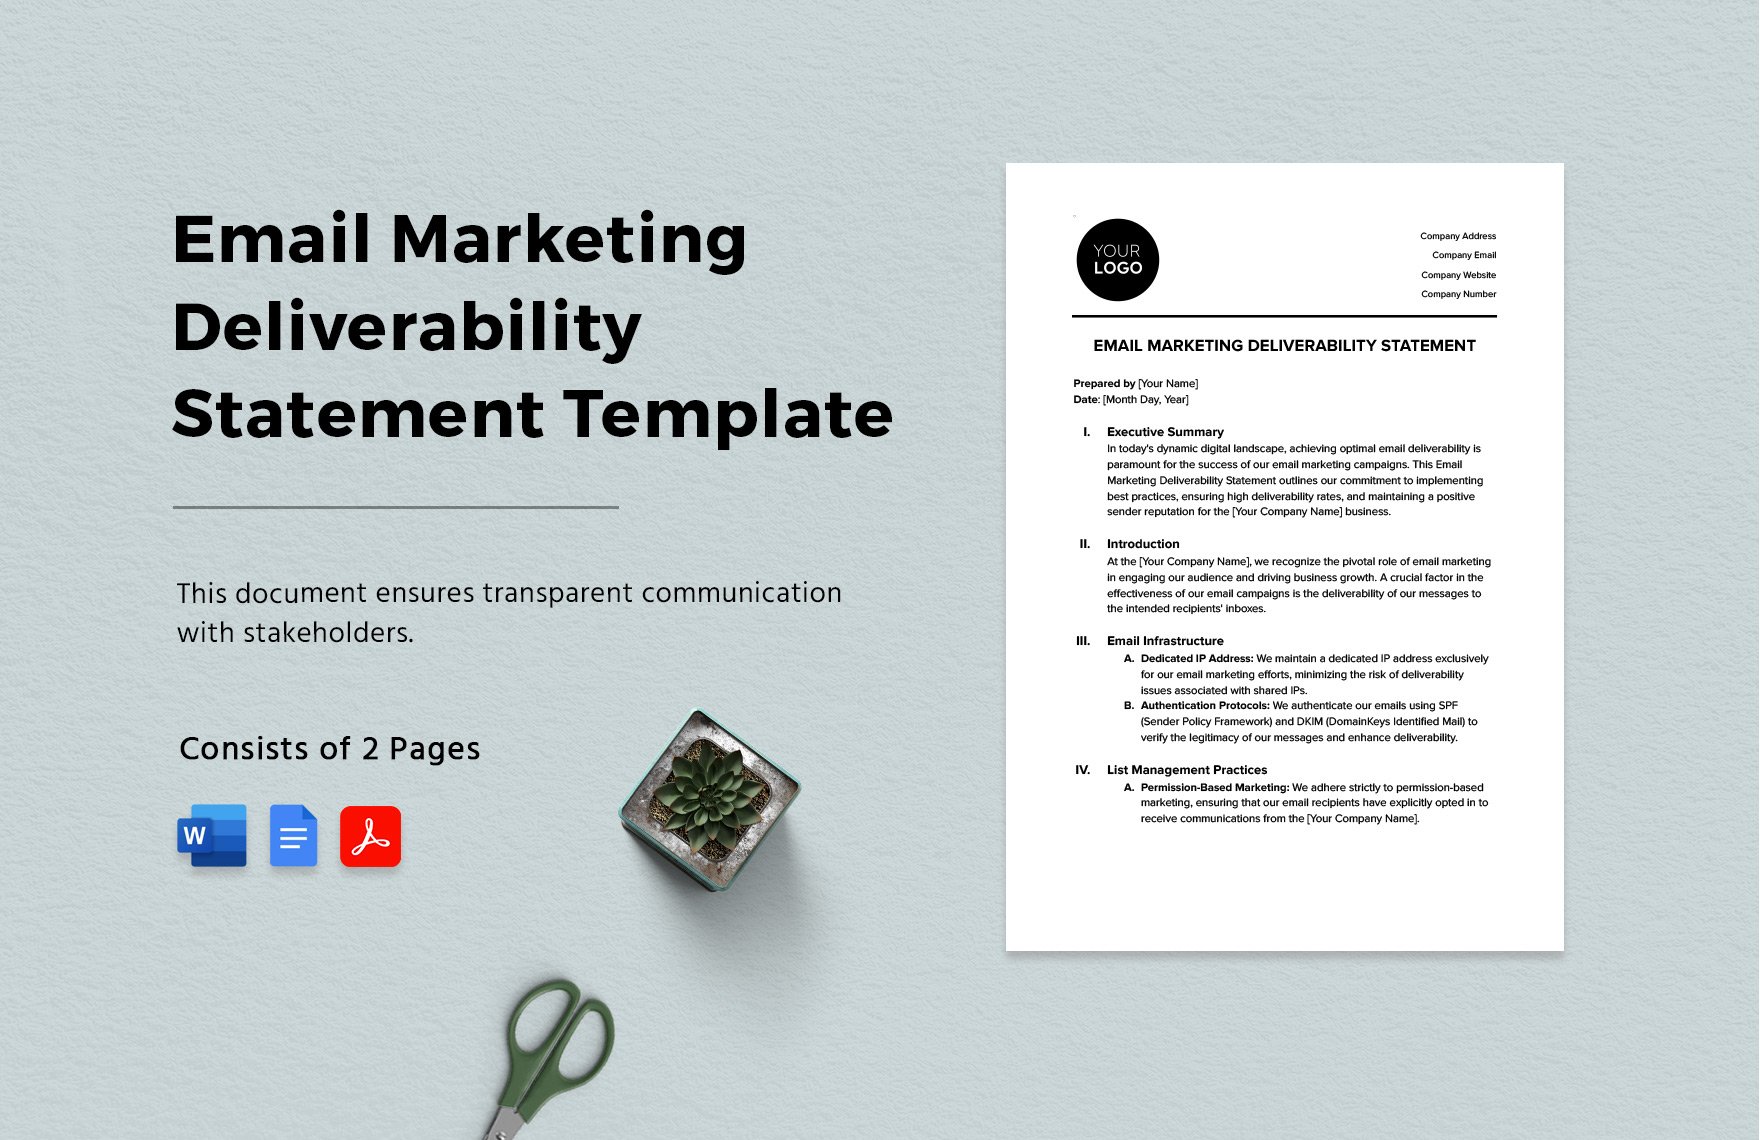 Email Marketing Deliverability Statement Template